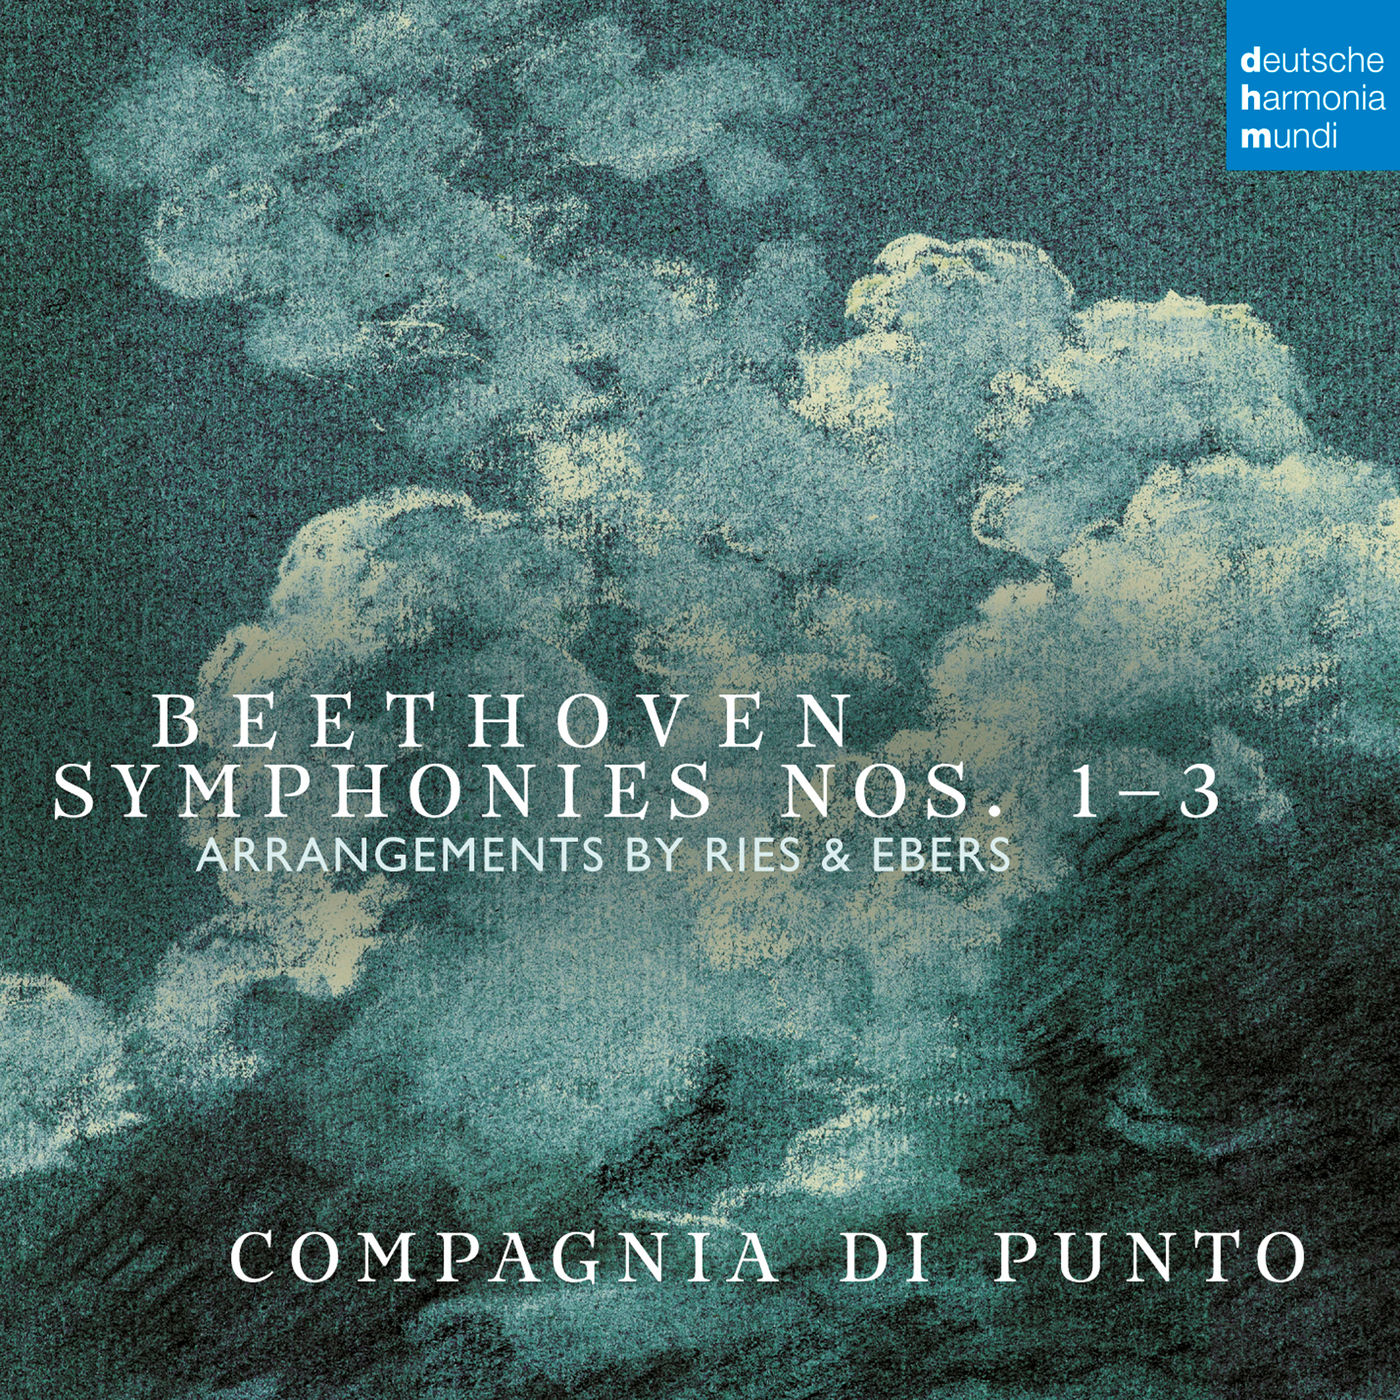 Compagnia di Punto – Beethoven: Symphonies Nos. 1-3 (Arr. by Ries & Ebers) (2020) [FLAC 24bit/48kHz]